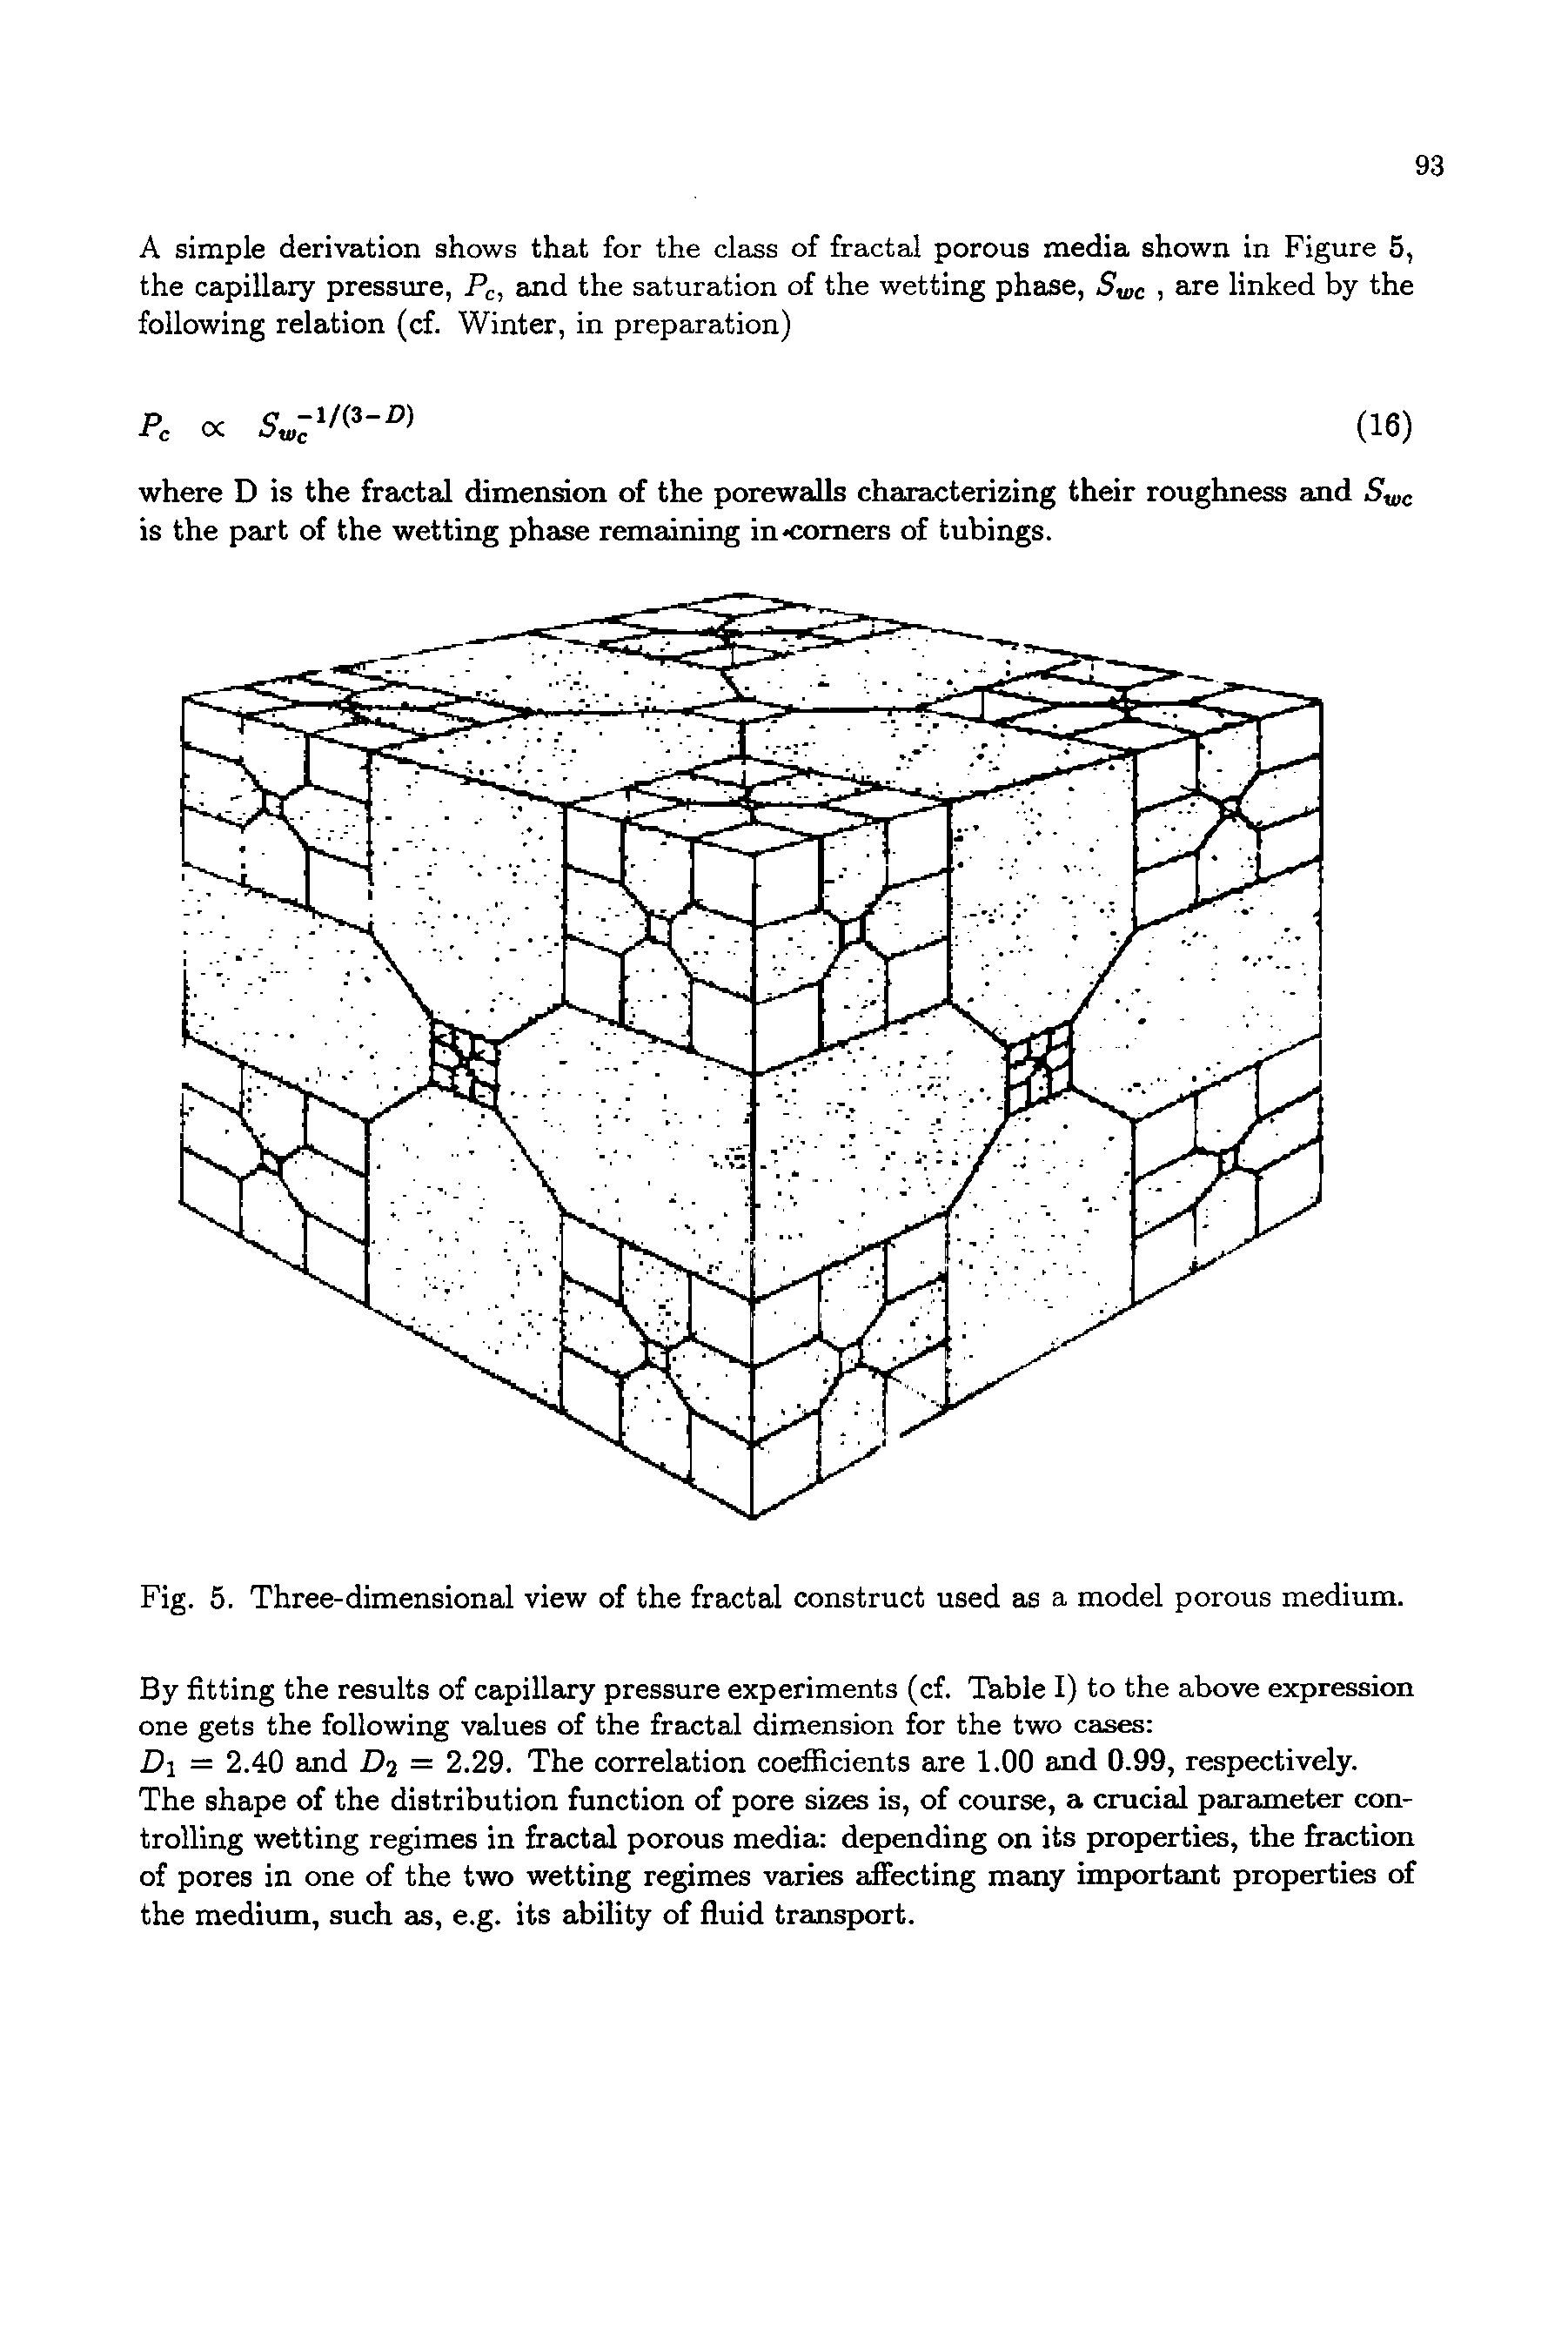 Fig. 5. Three-dimensional view of the fractal construct used as a model porous medium.